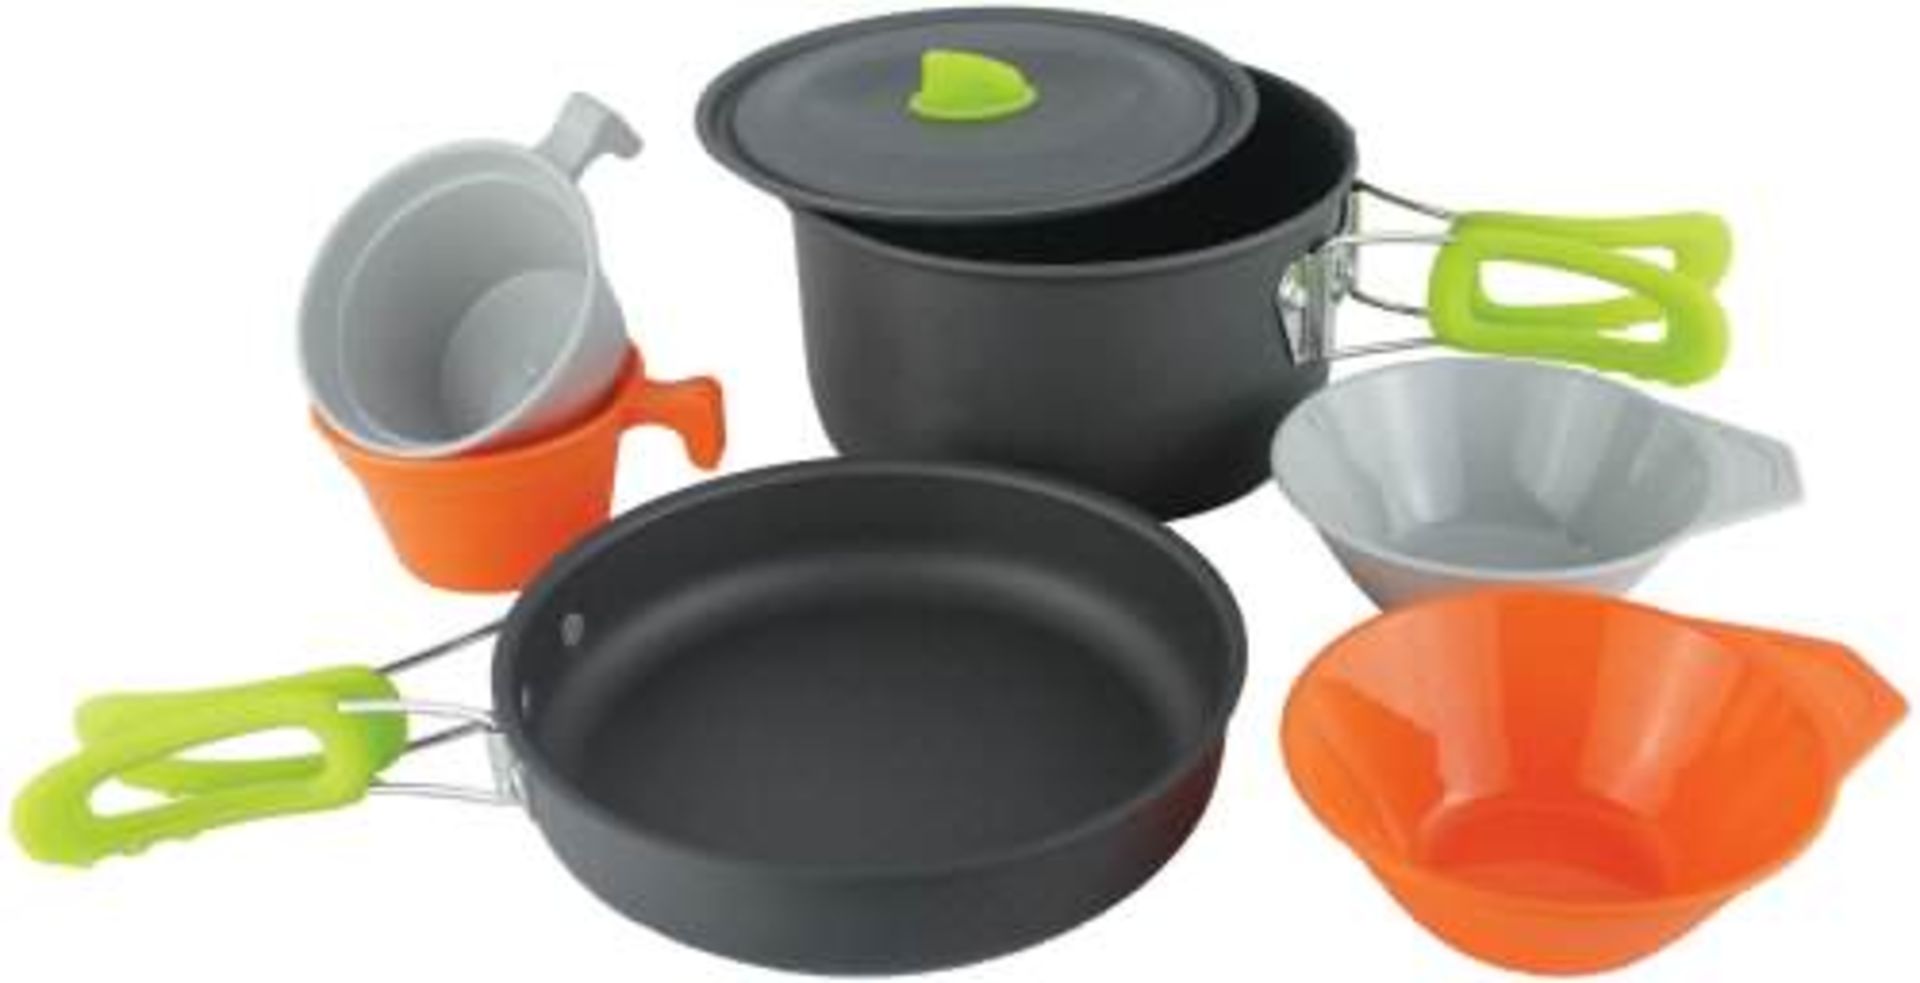 V Brand New Cumbria Lightweight Cook Set With 1.2 litre Pot 6.5 inch Fry Pan Universal Lid 2 Cups